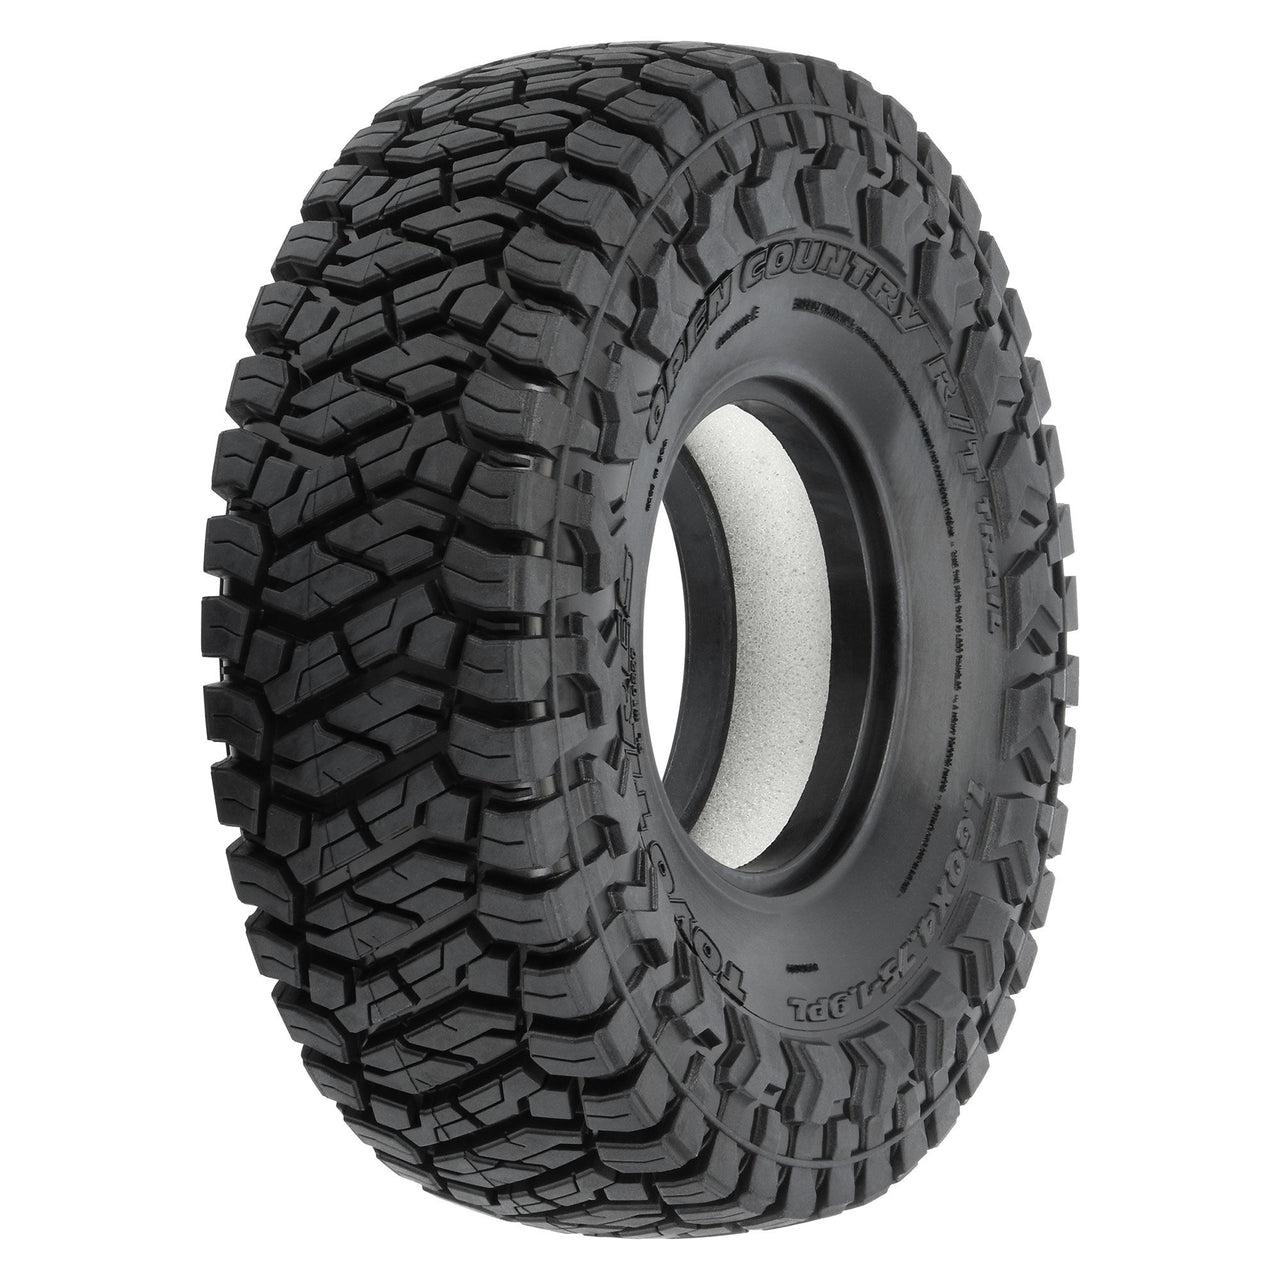 PRO1022614 1/10 Toyo Open Country R/T Trail G8 F/R 1.9" Rock Crawling Tires (2)